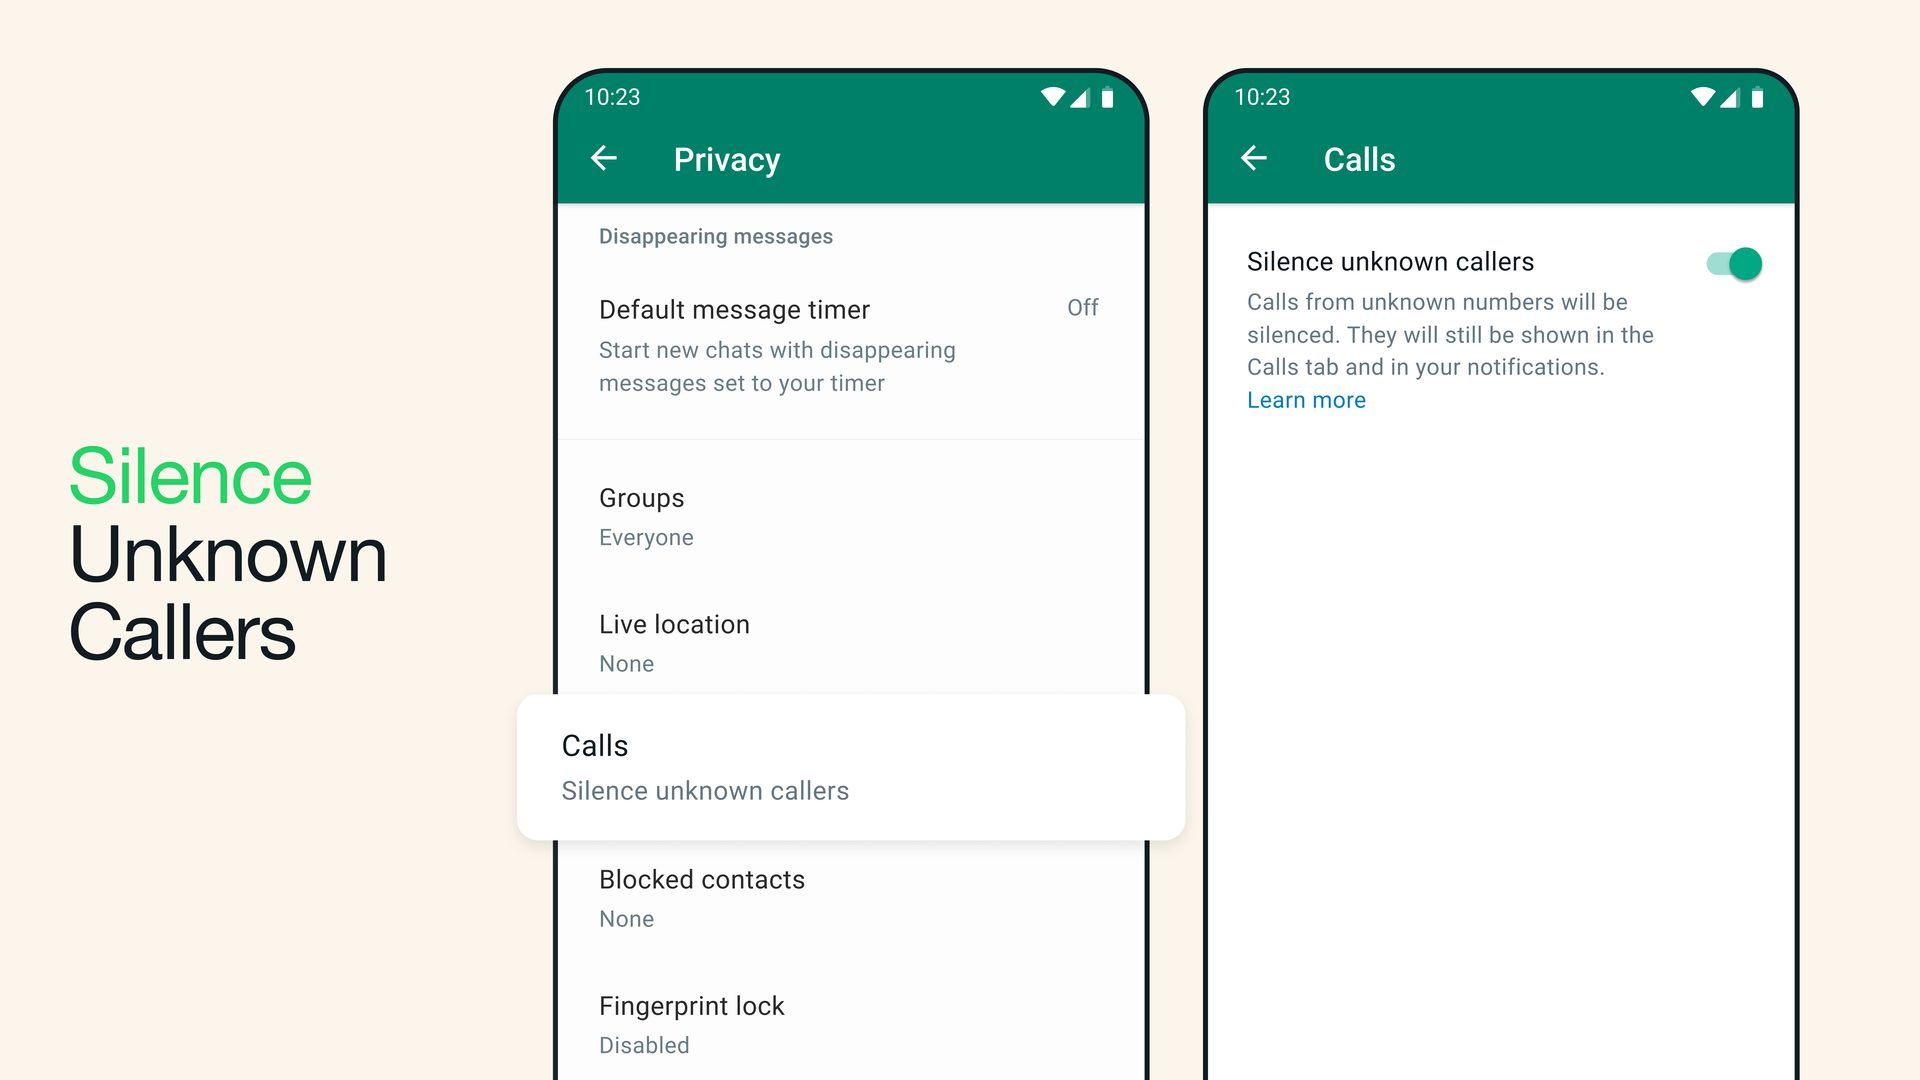 With this article, you can learn how to use WhatsApp Silence Unknown Callers feature and Privacy Checkup option. Keep reading and explore!